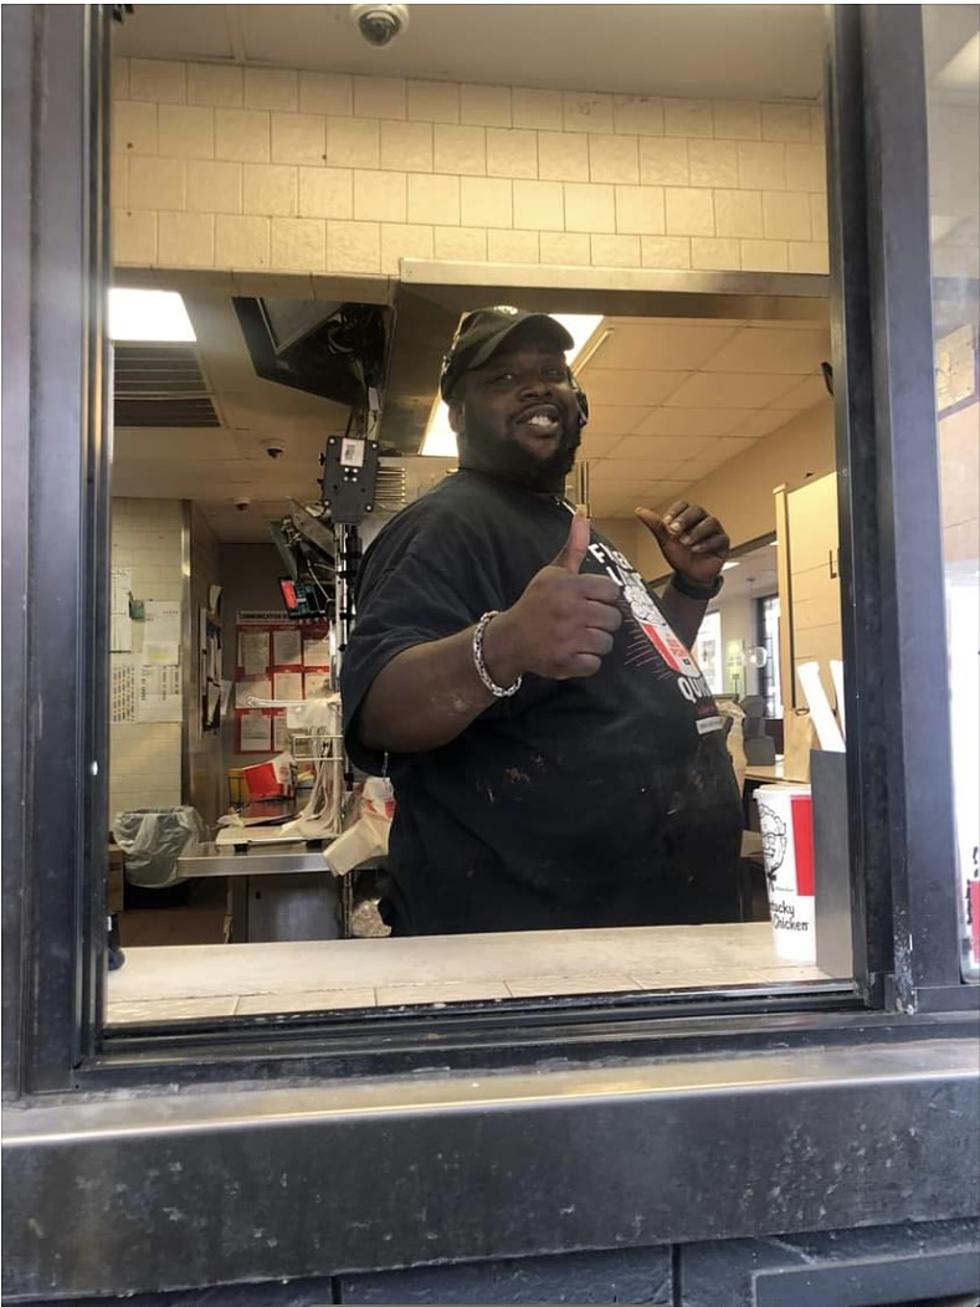 Service With A Smile In Tuscaloosa: One Man Works Entire KFC